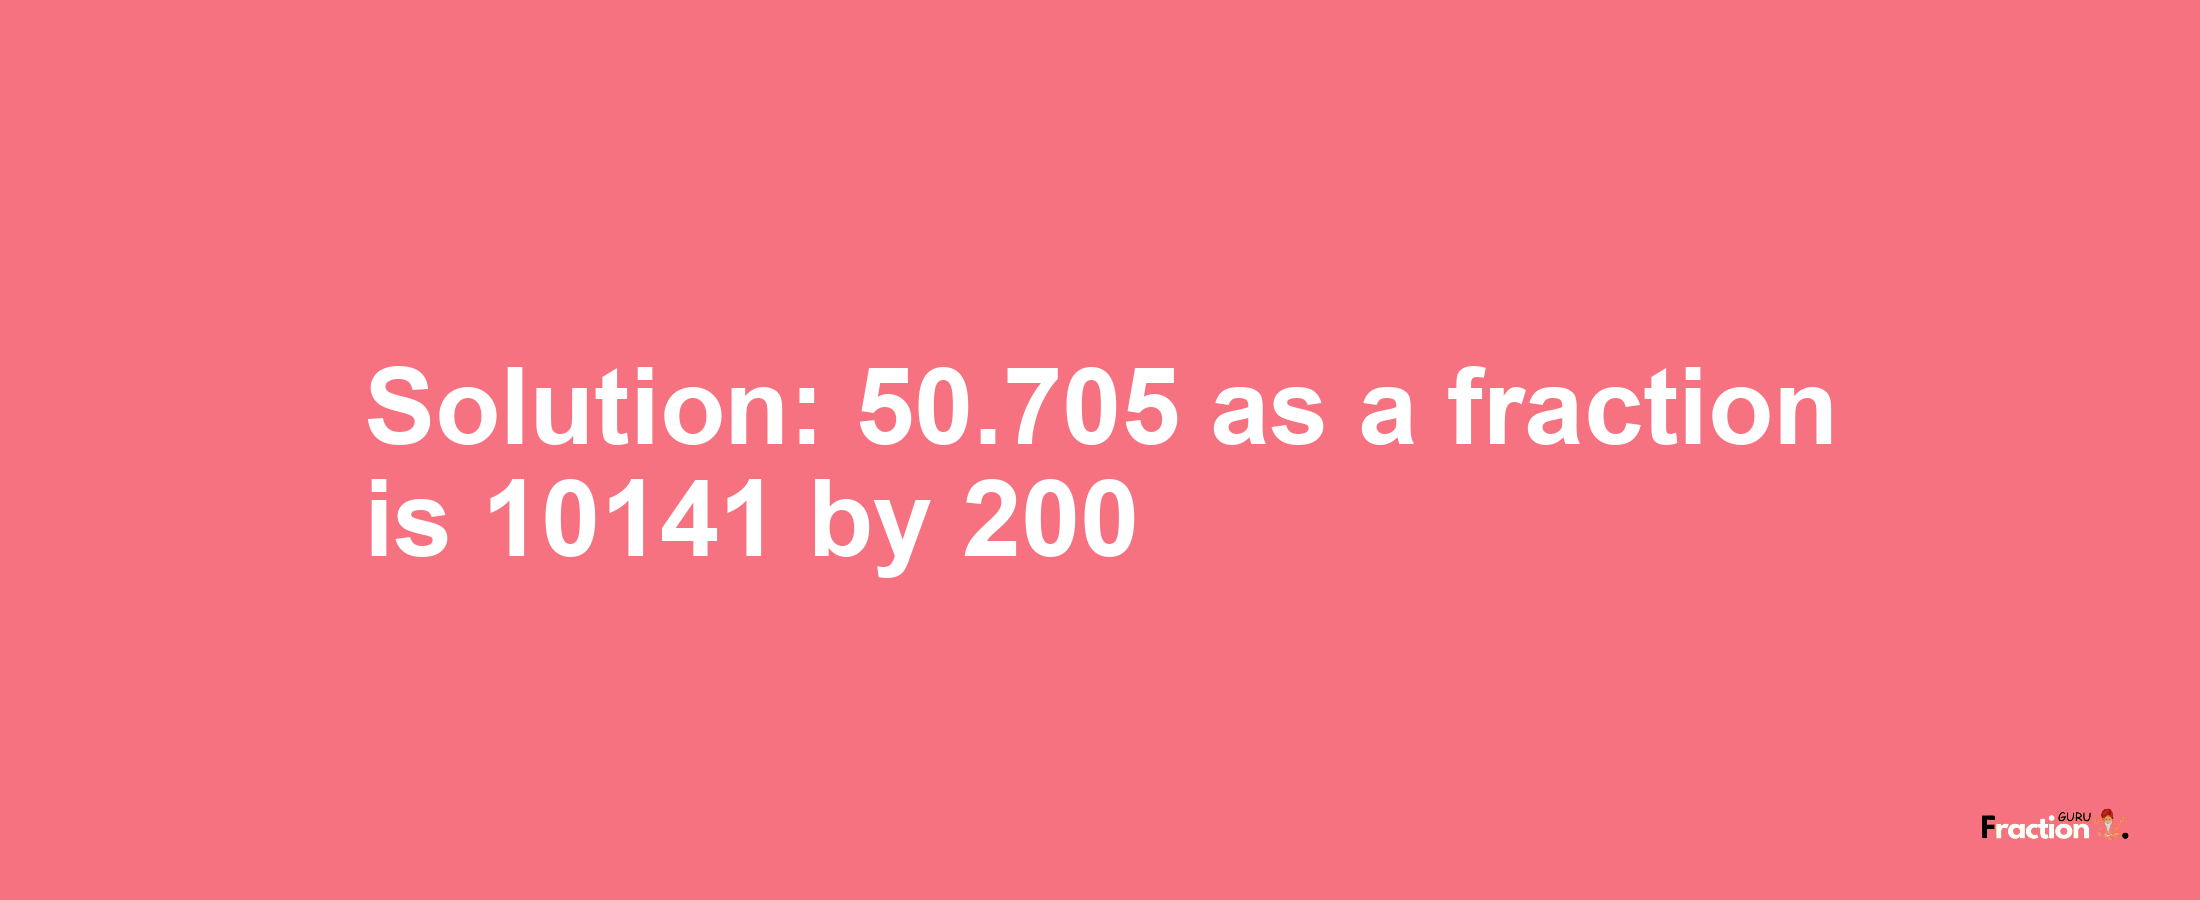 Solution:50.705 as a fraction is 10141/200